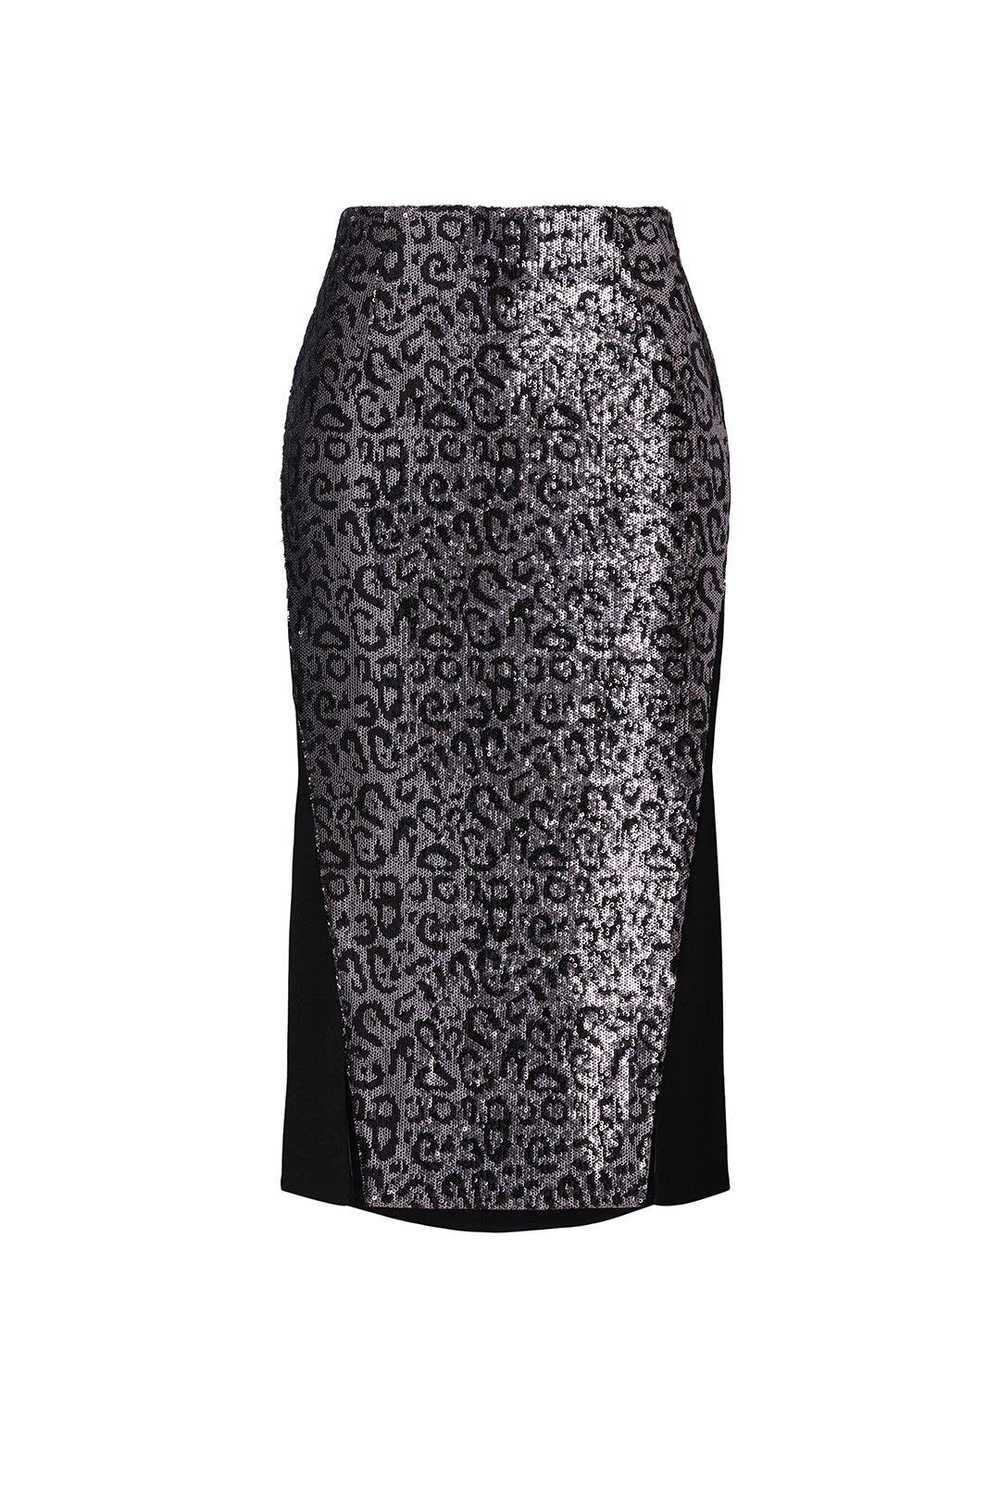 N12H First Row Sequin Skirt - image 5